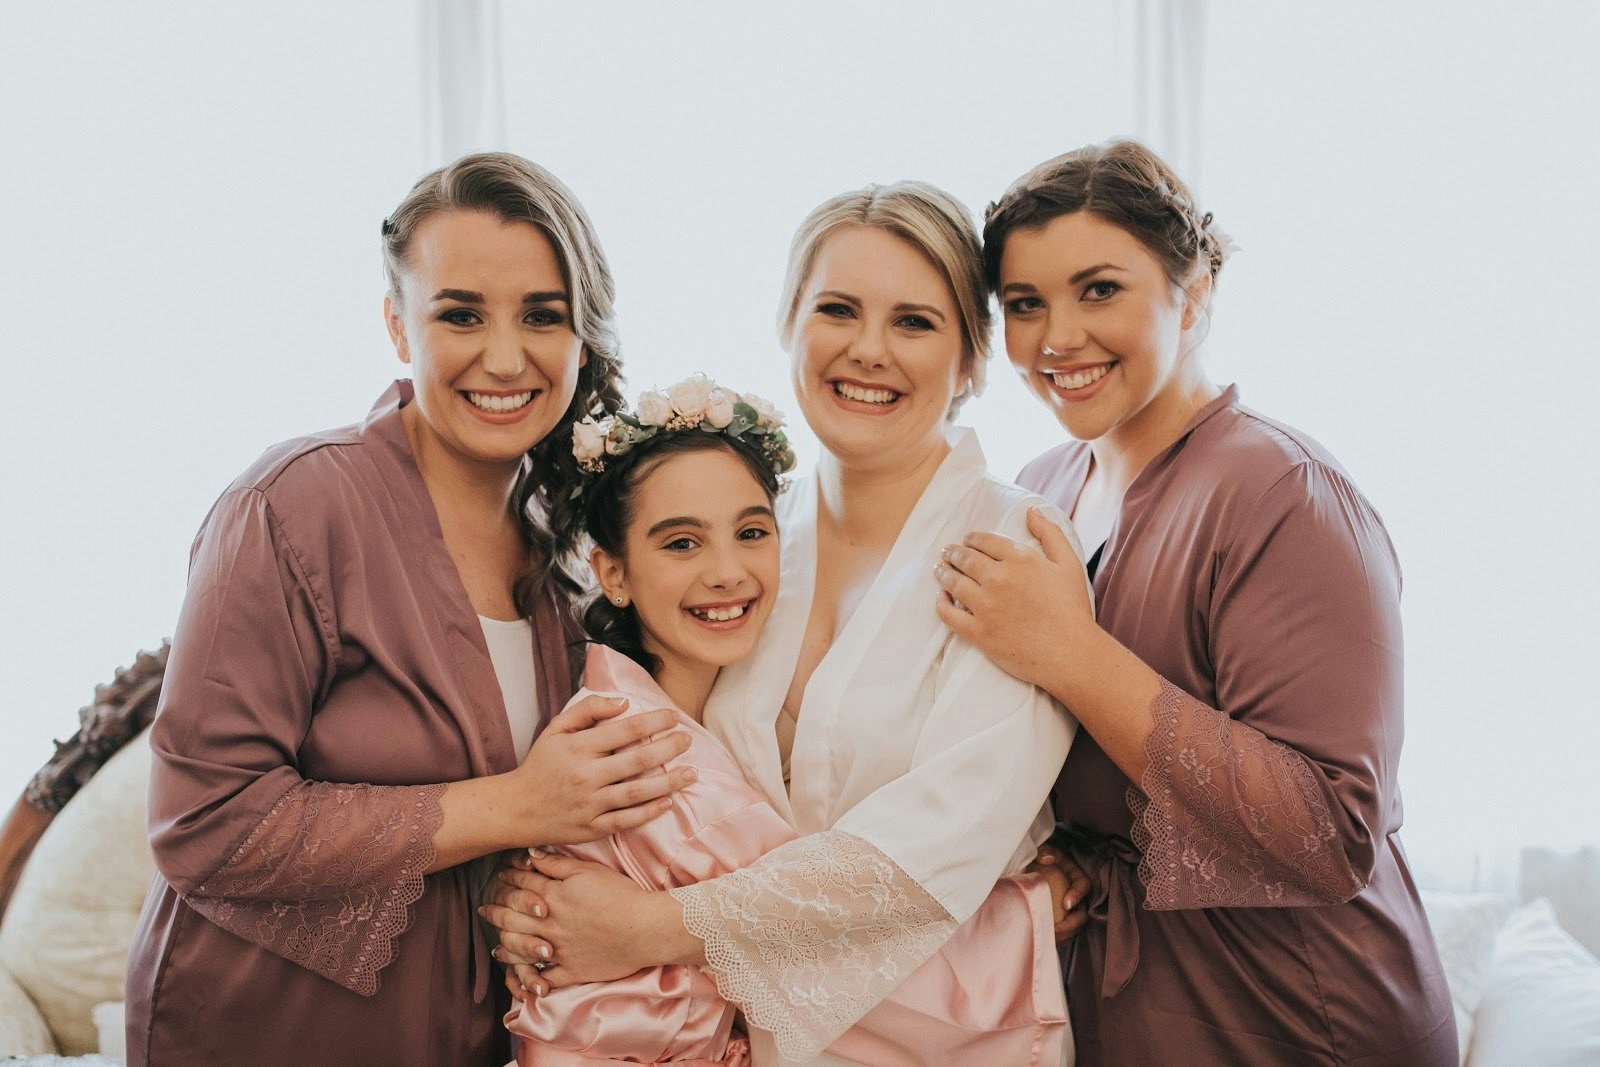 Bride, bridesmaid and flower girl hugging. Getting ready for wedding in their dressing gowns.